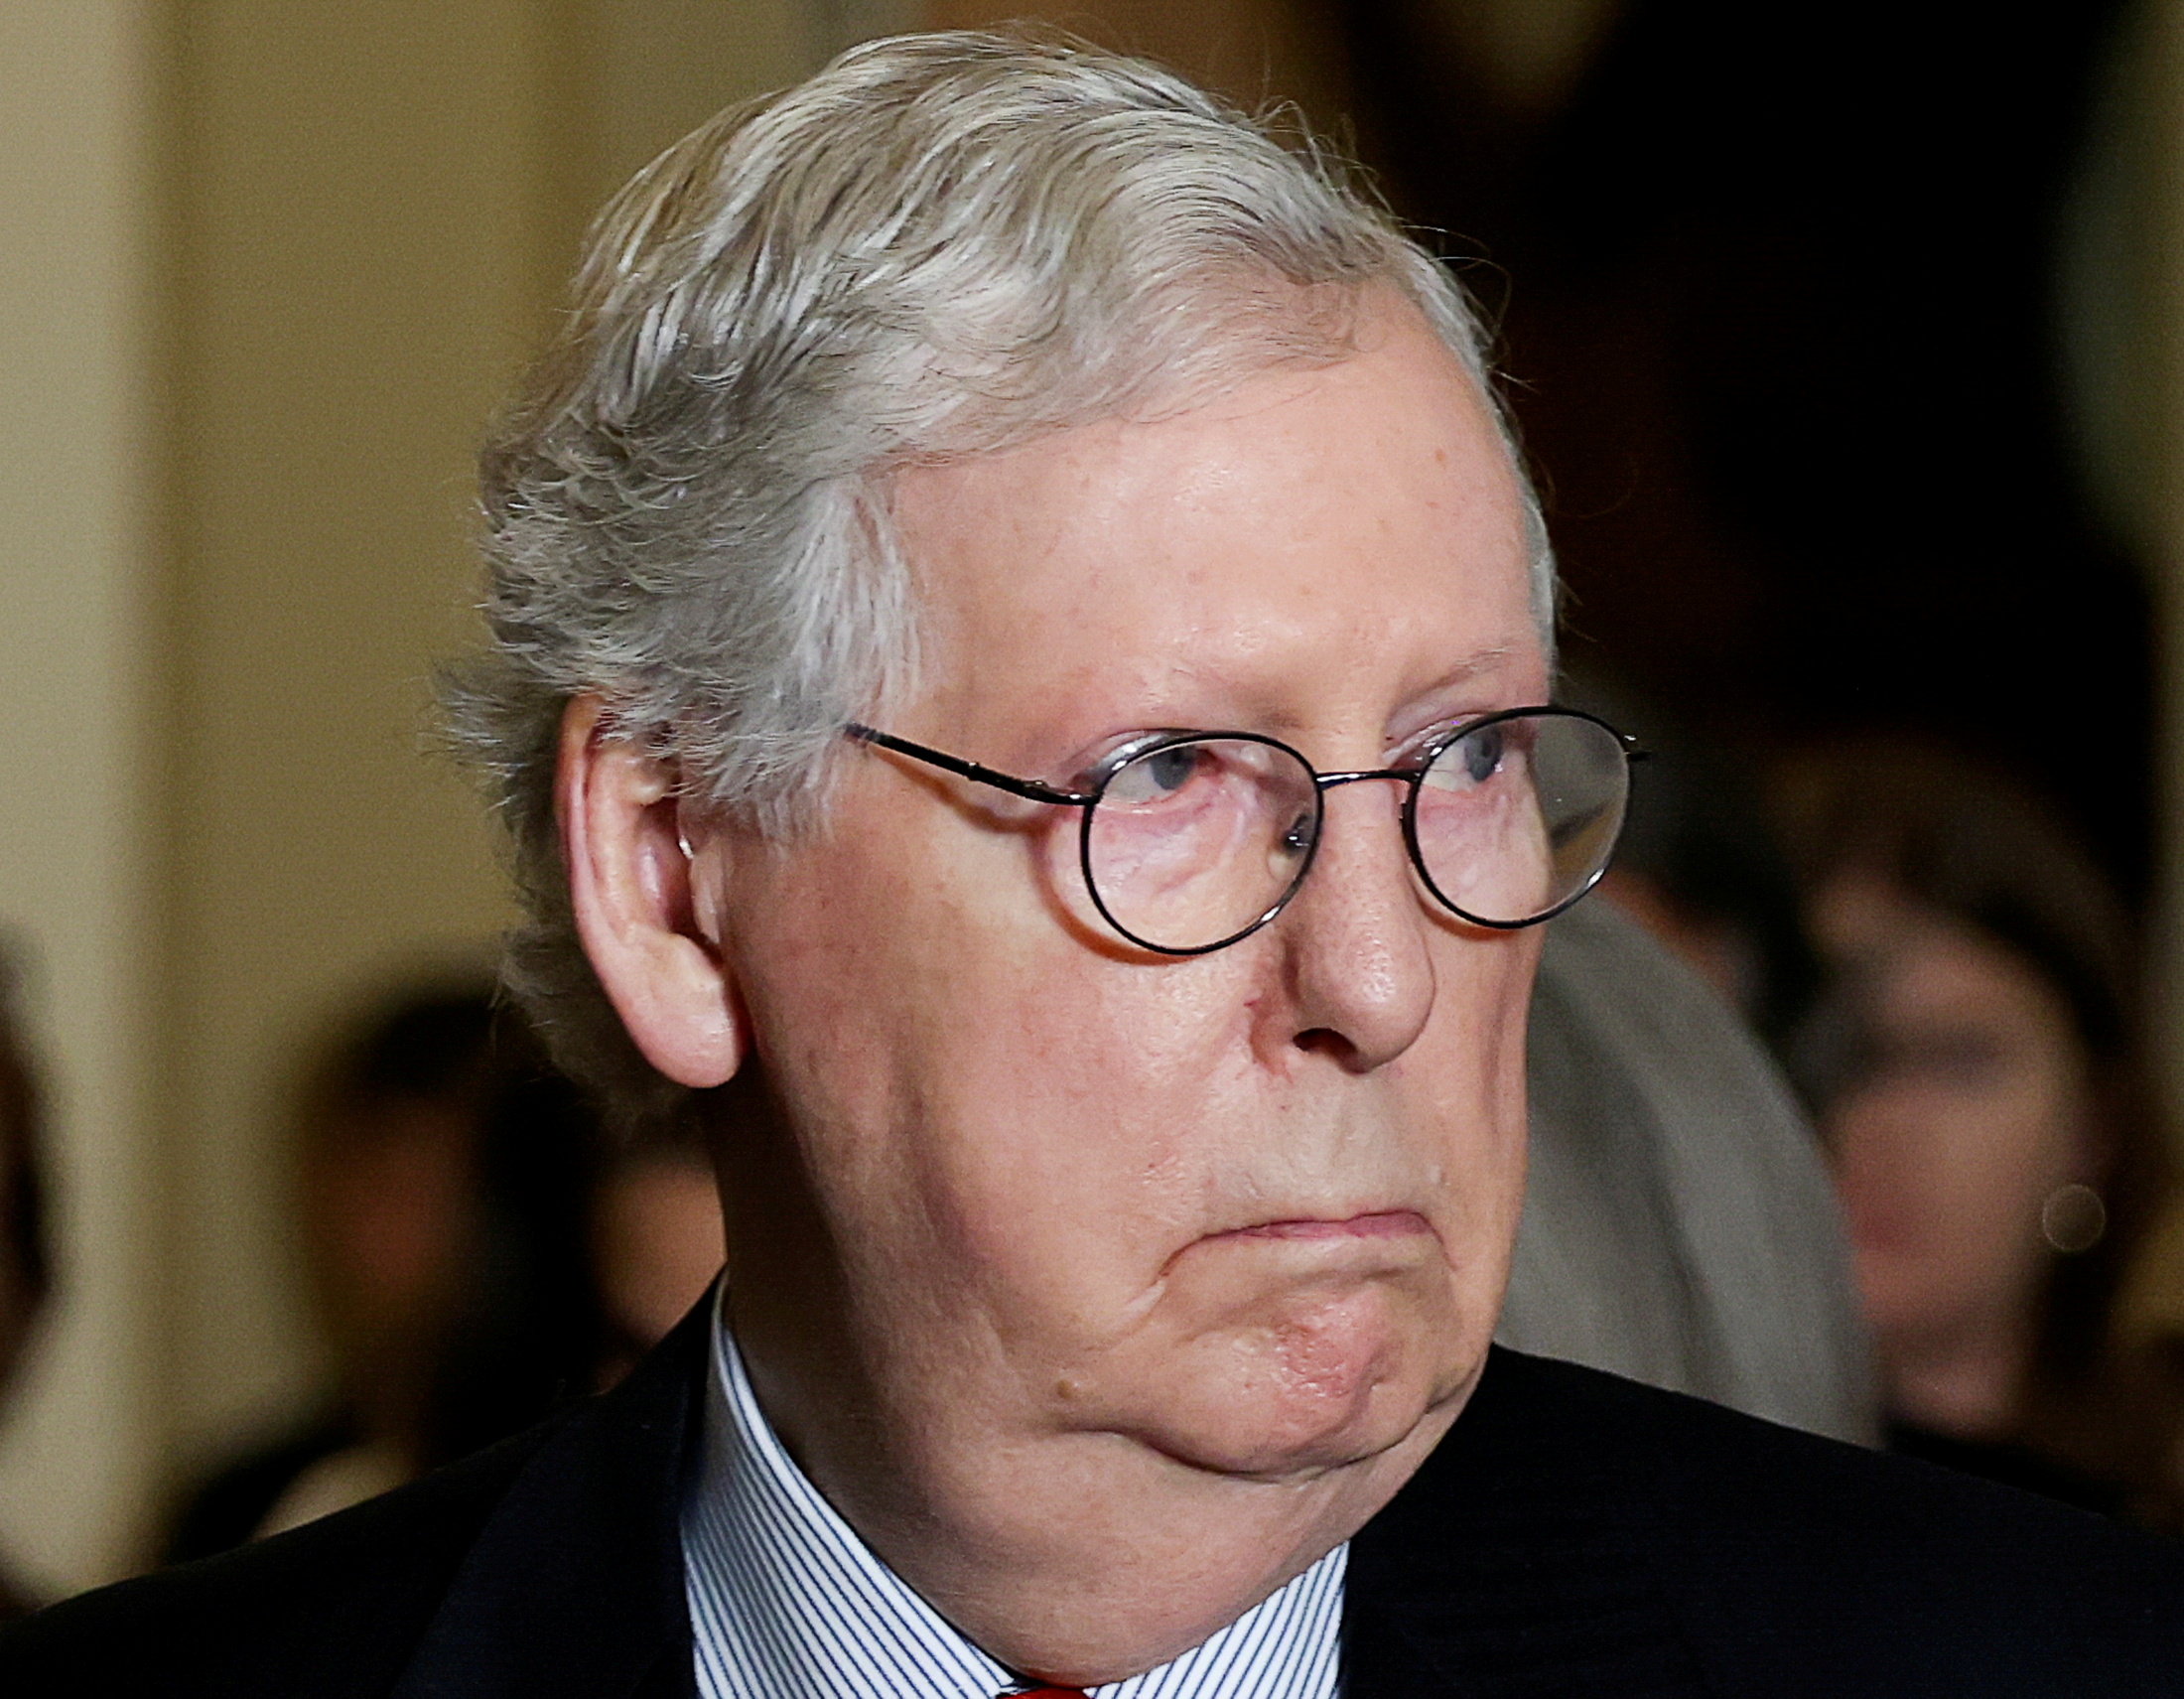 Senate’s ‘nothing but no’ McConnell stands as roadblock to Biden agenda